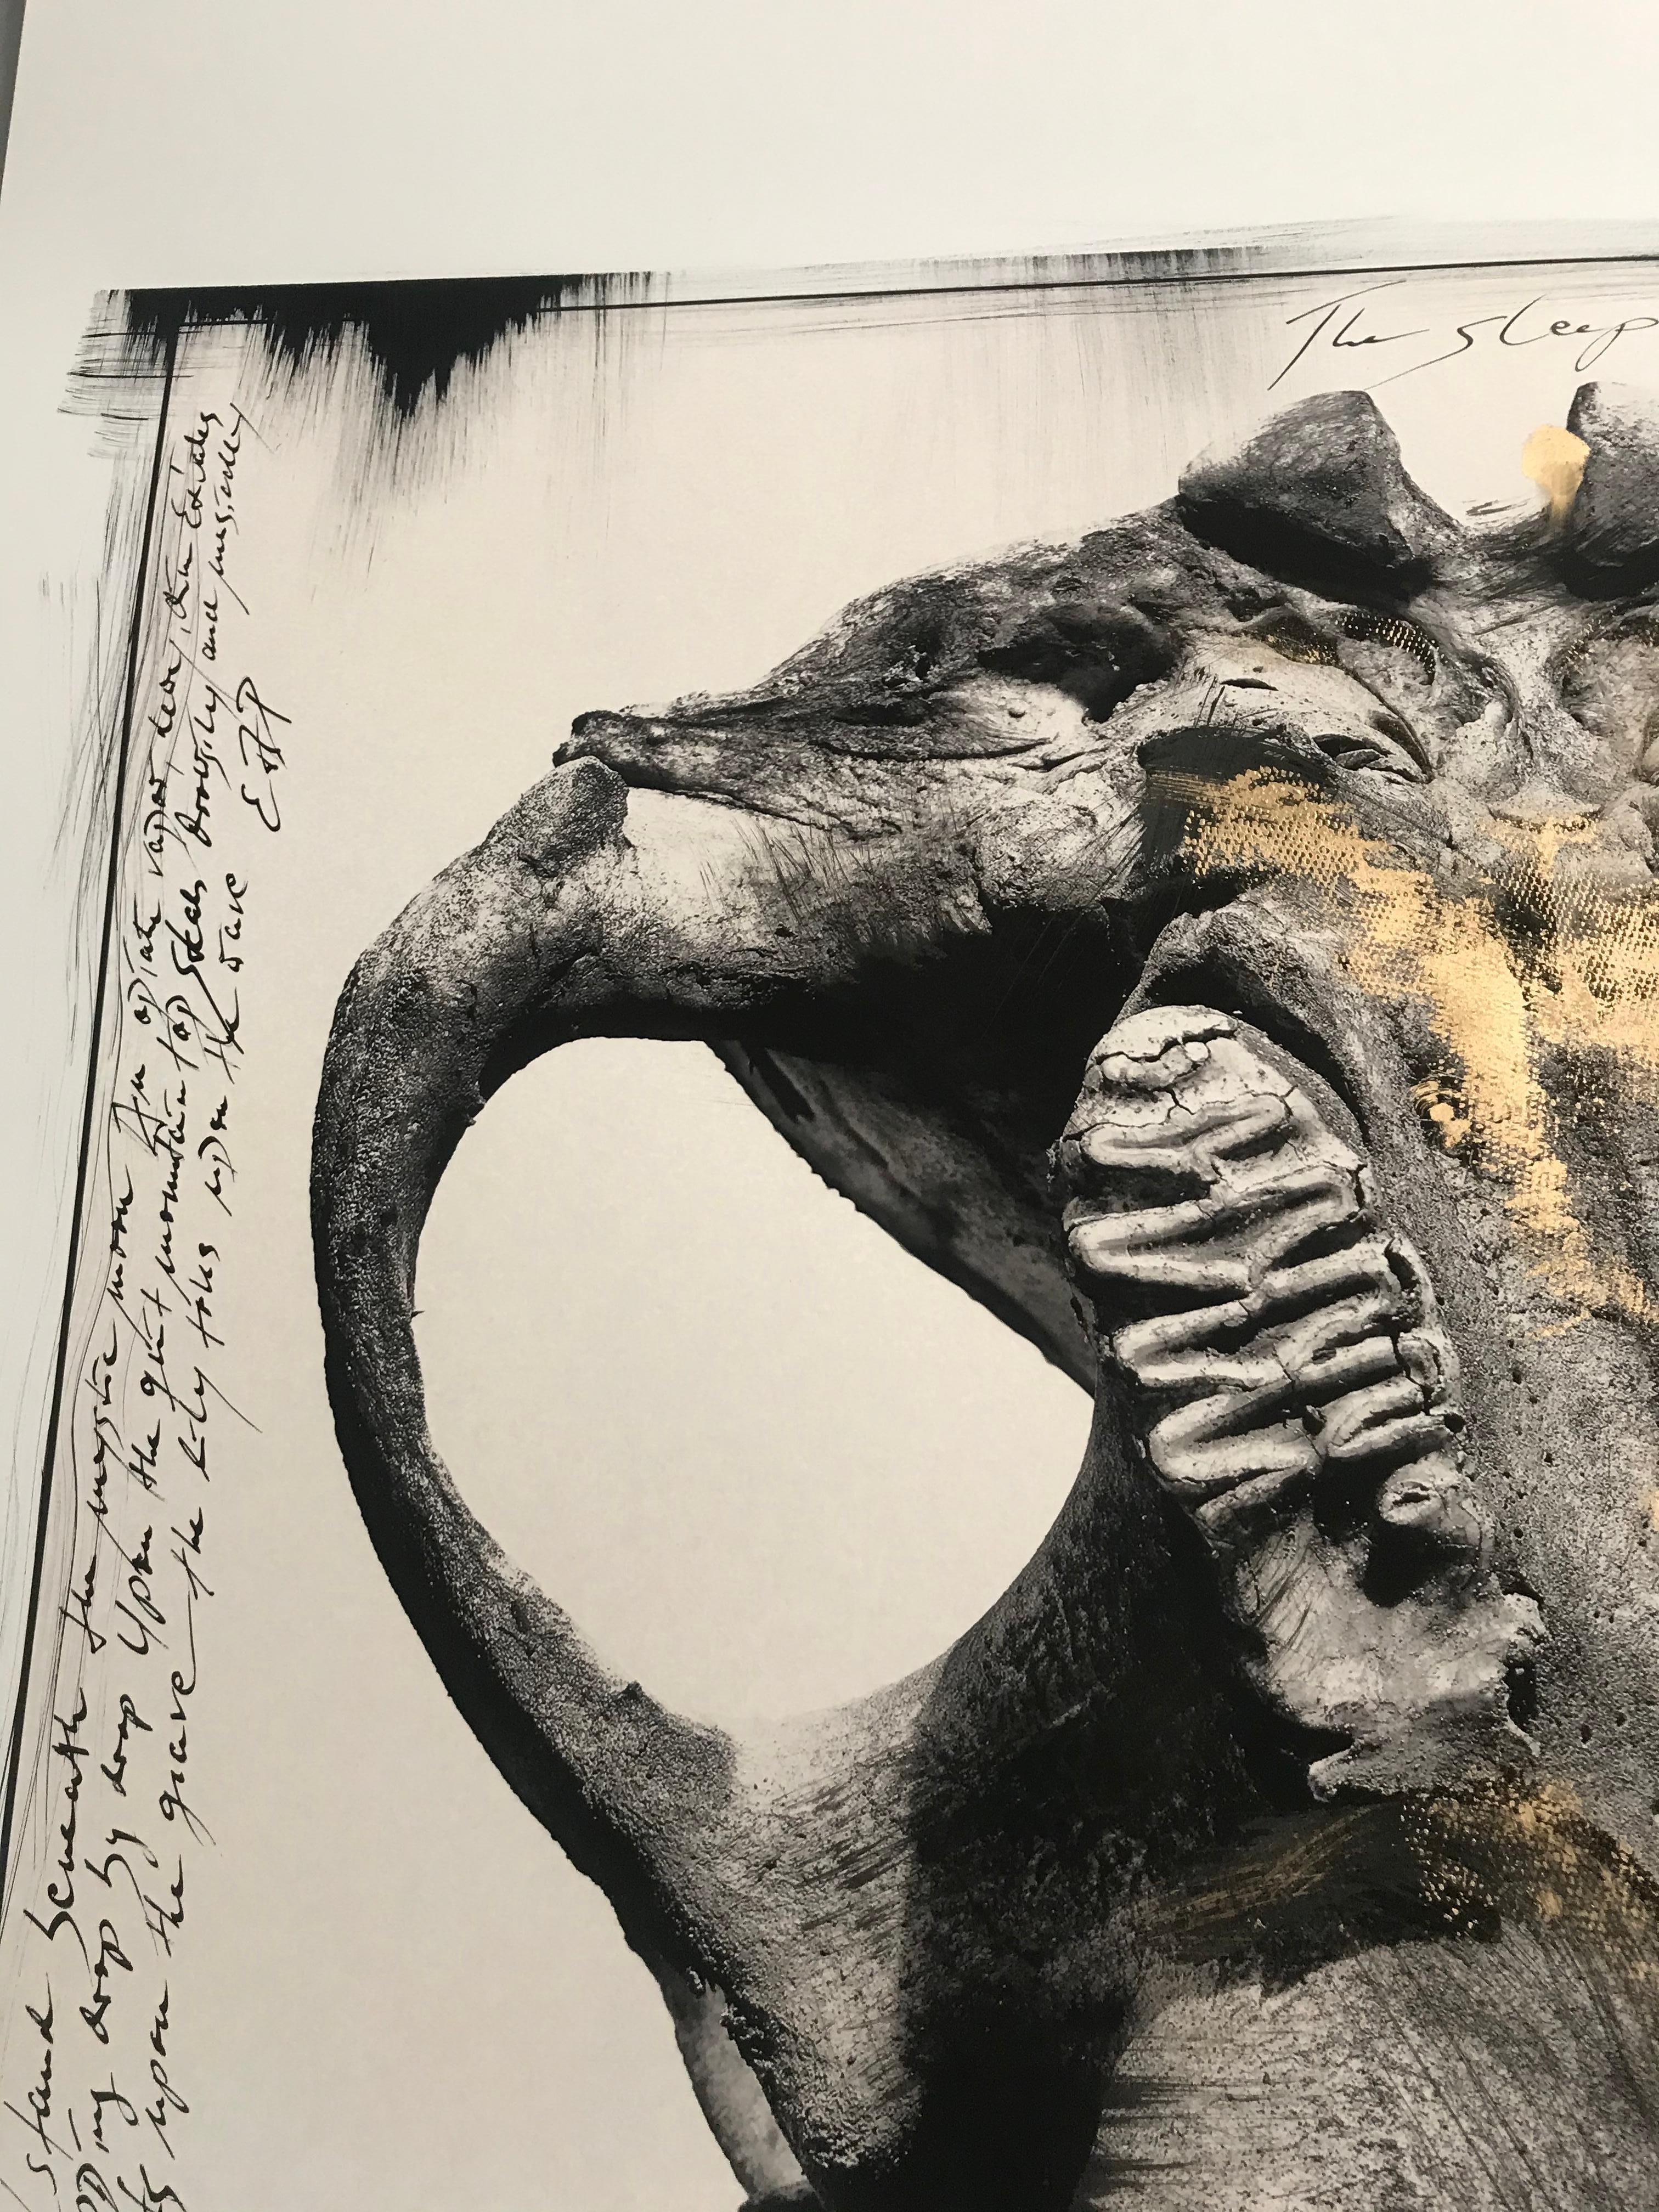 Unique Piece / One of a Kind

An upper jaw of an Elephant skull. Museum Archival Print on Hahnemühle Laid paper, Photography painted with Drawing Ink, Gold Pigments. Handwritten poem by Edgar Allan Poe.

He is one of the multifaceted artists among